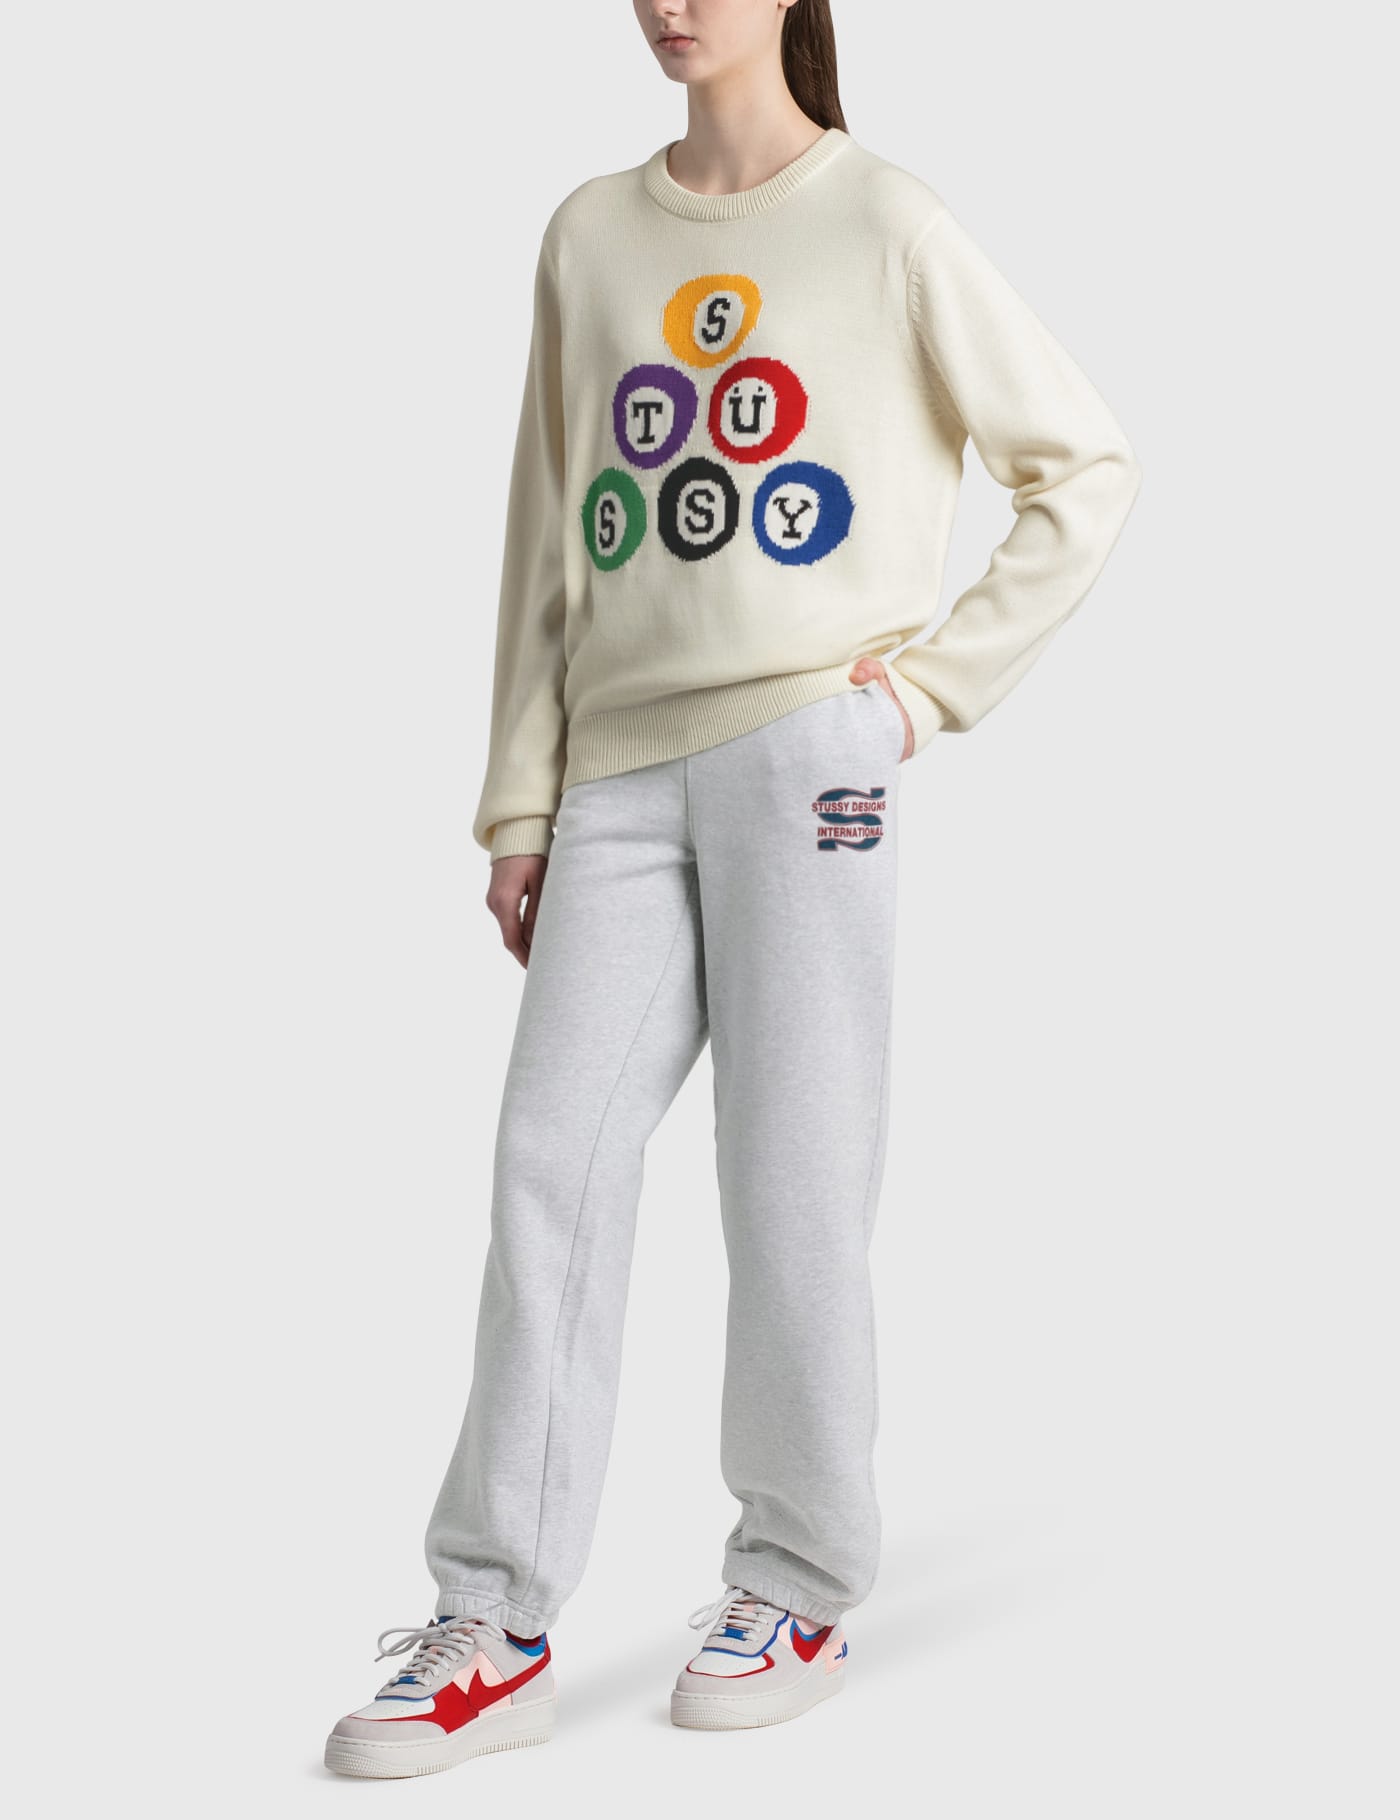 Stussy - Stussy Billiard Sweater | HBX - Globally Curated Fashion and  Lifestyle by Hypebeast